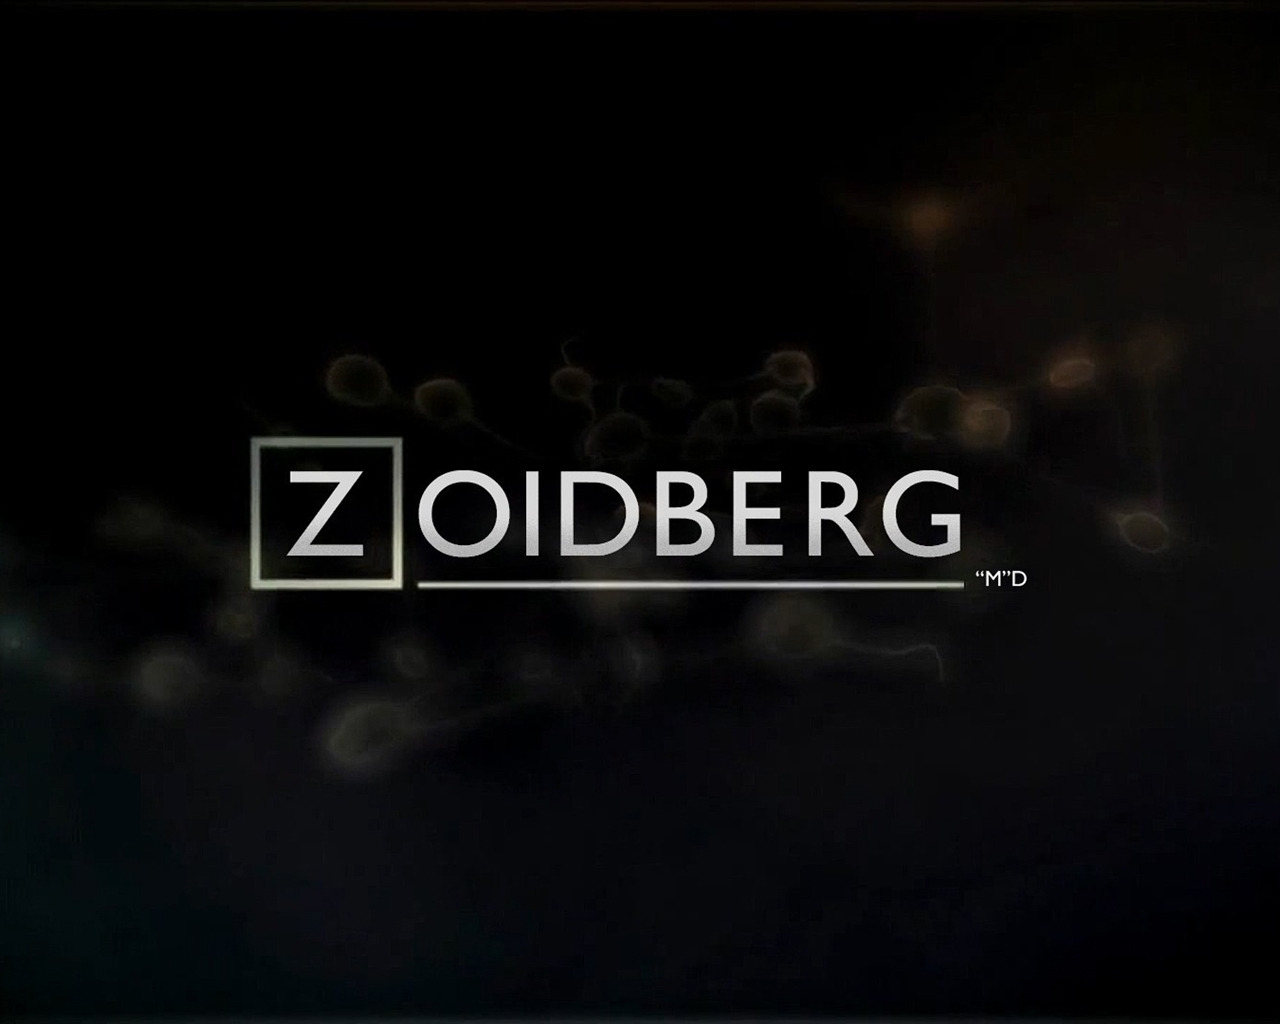 Zoidberg MD for 1280 x 1024 resolution